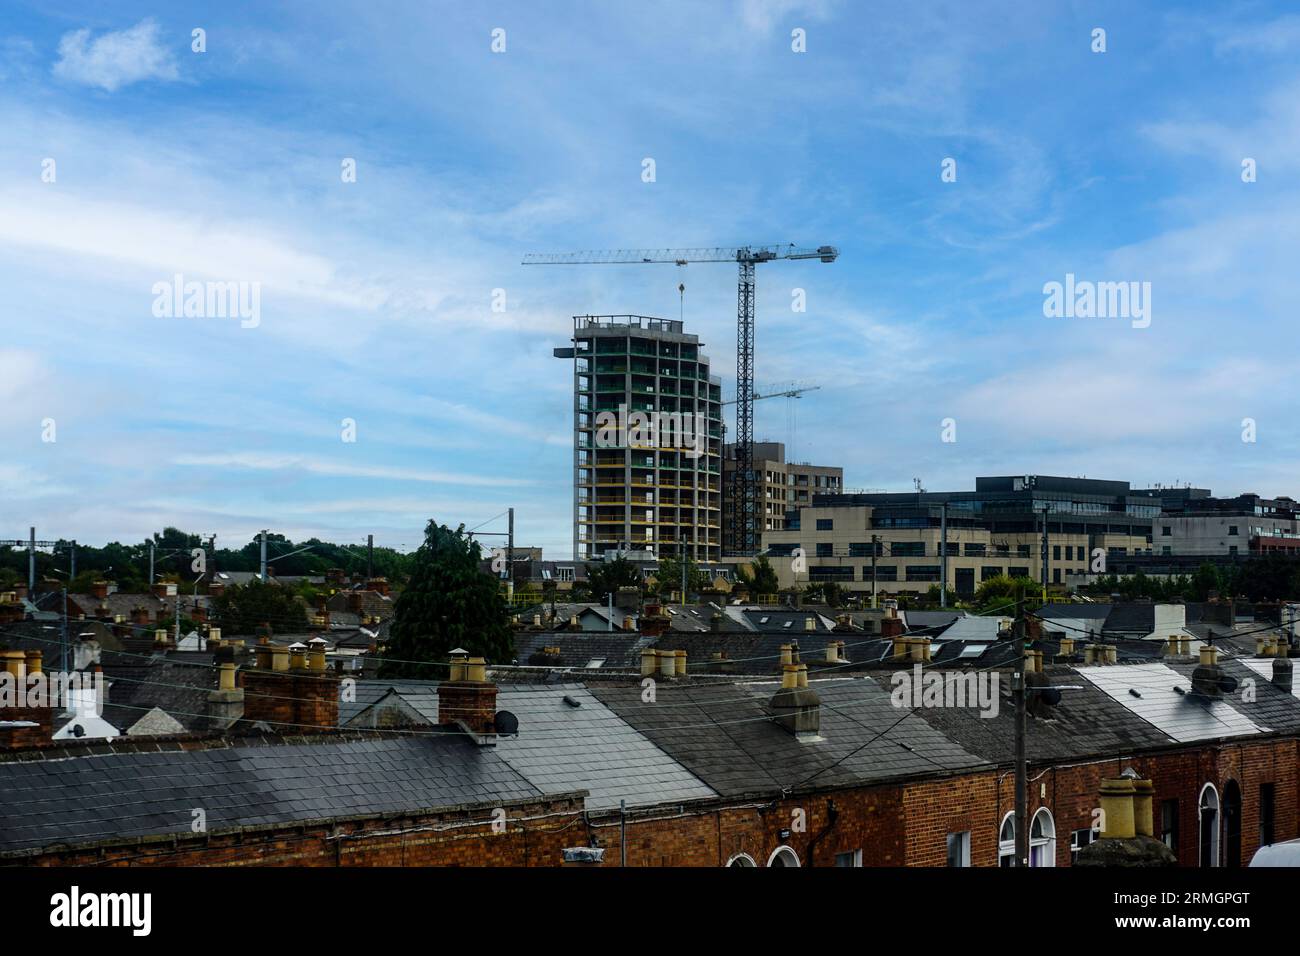 Construction of a 15 storey hotel, offices and build to rent apartments in East Wall Road, East Wall. Dublin Ireland. MKN Property are the developers Stock Photo